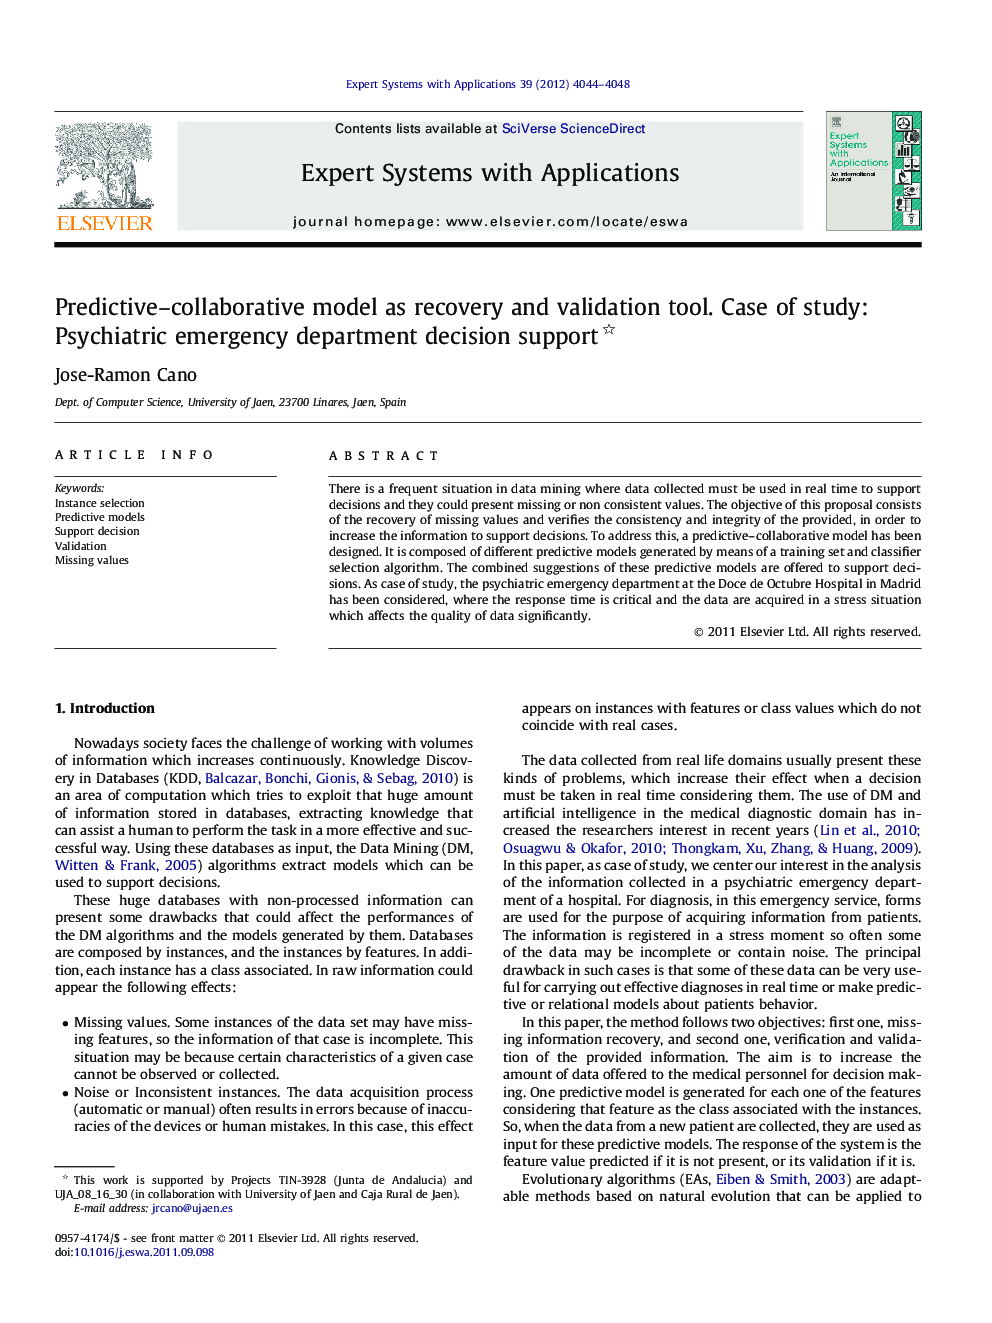 Predictive–collaborative model as recovery and validation tool. Case of study: Psychiatric emergency department decision support 